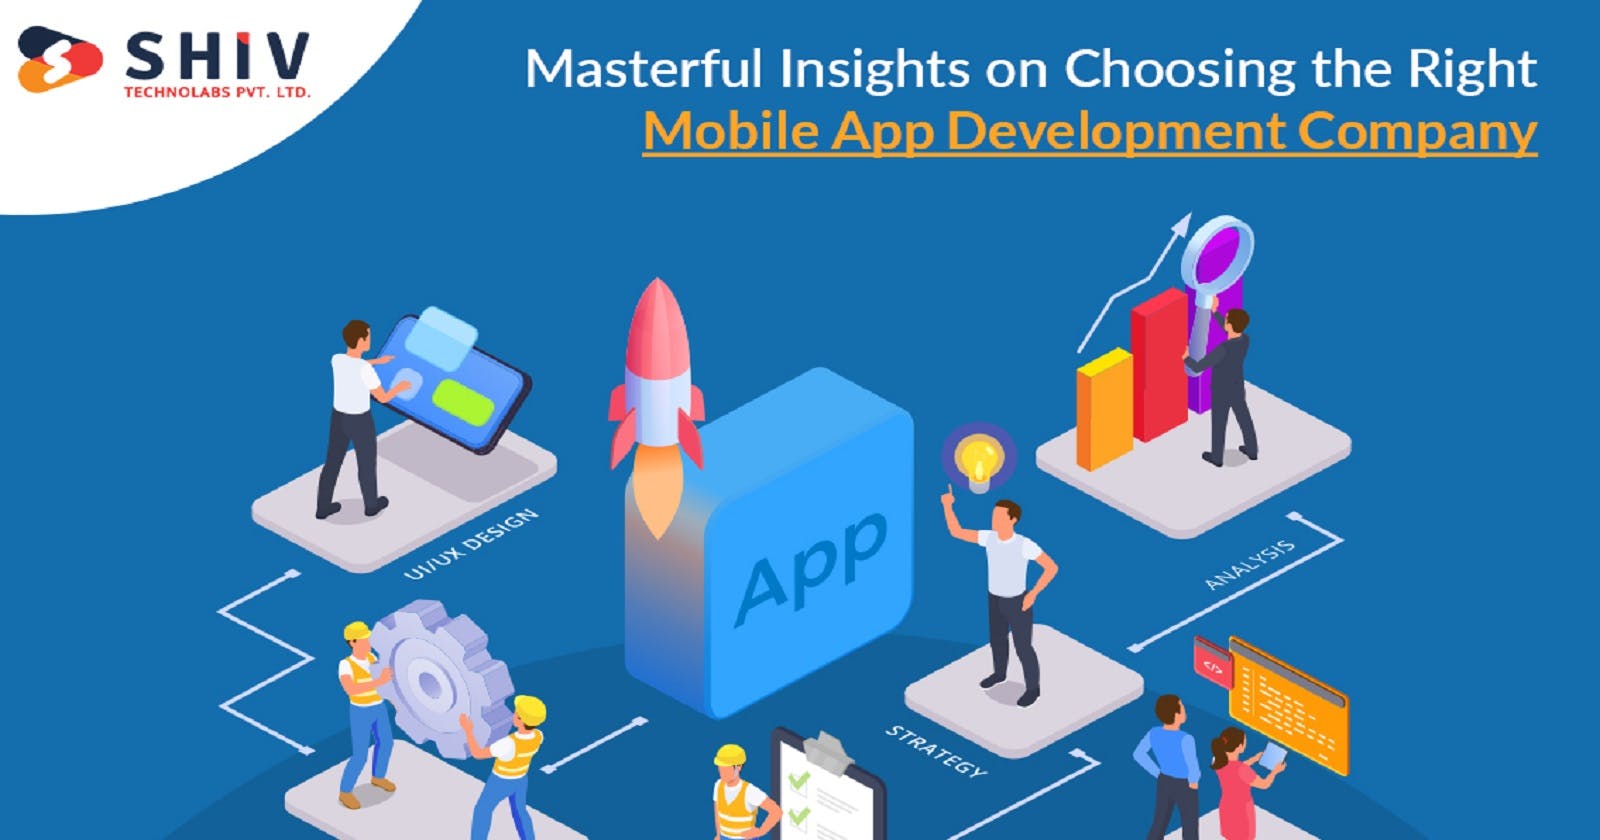 Masterful Insights on Choosing the Right Mobile App Development Company